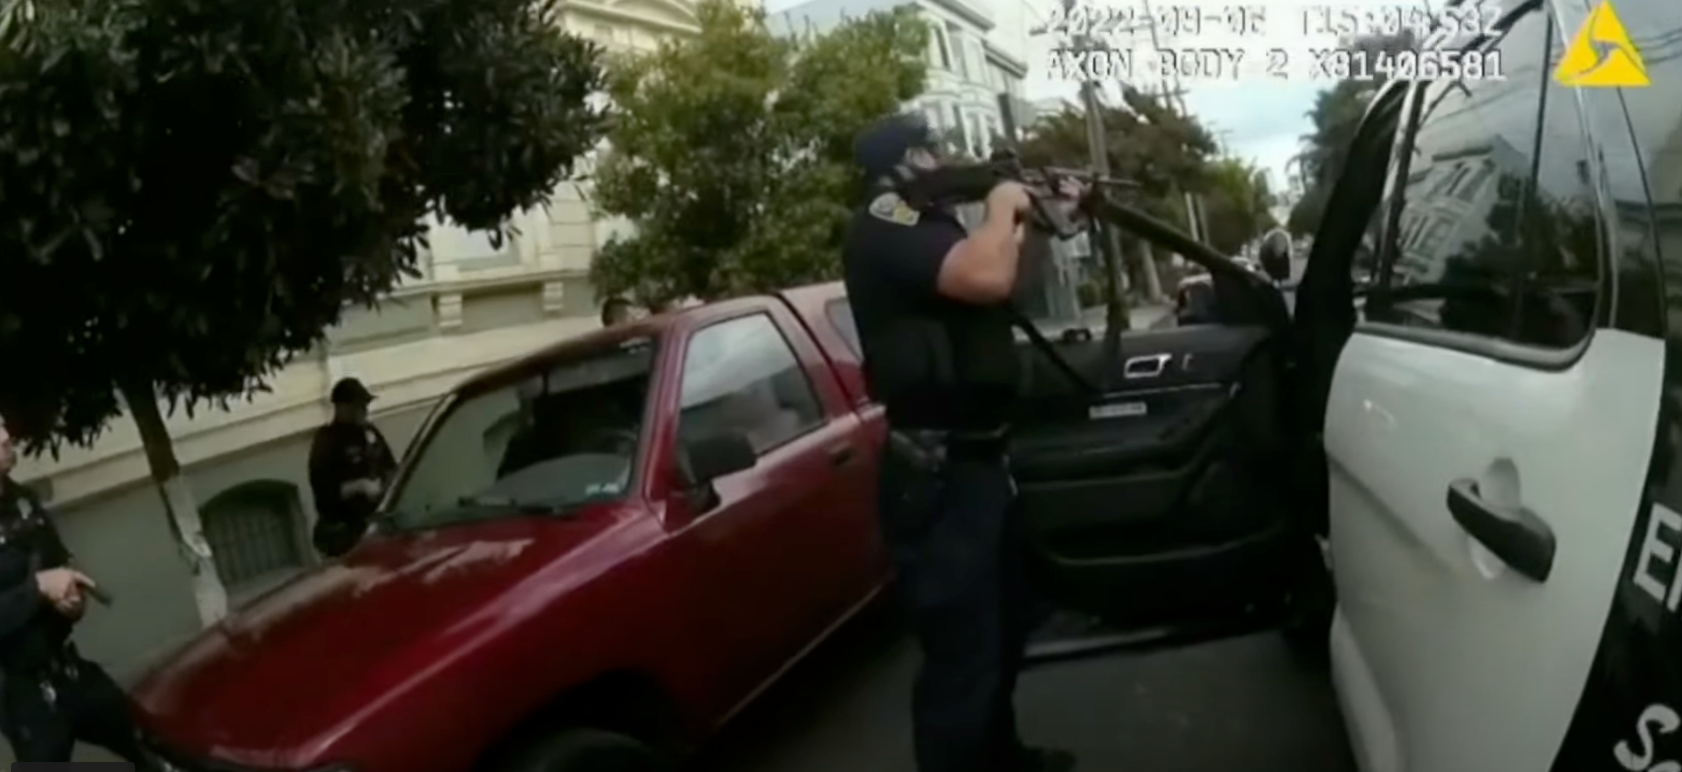 A still from police bodycam footage shows a police officer pointing a rifle.